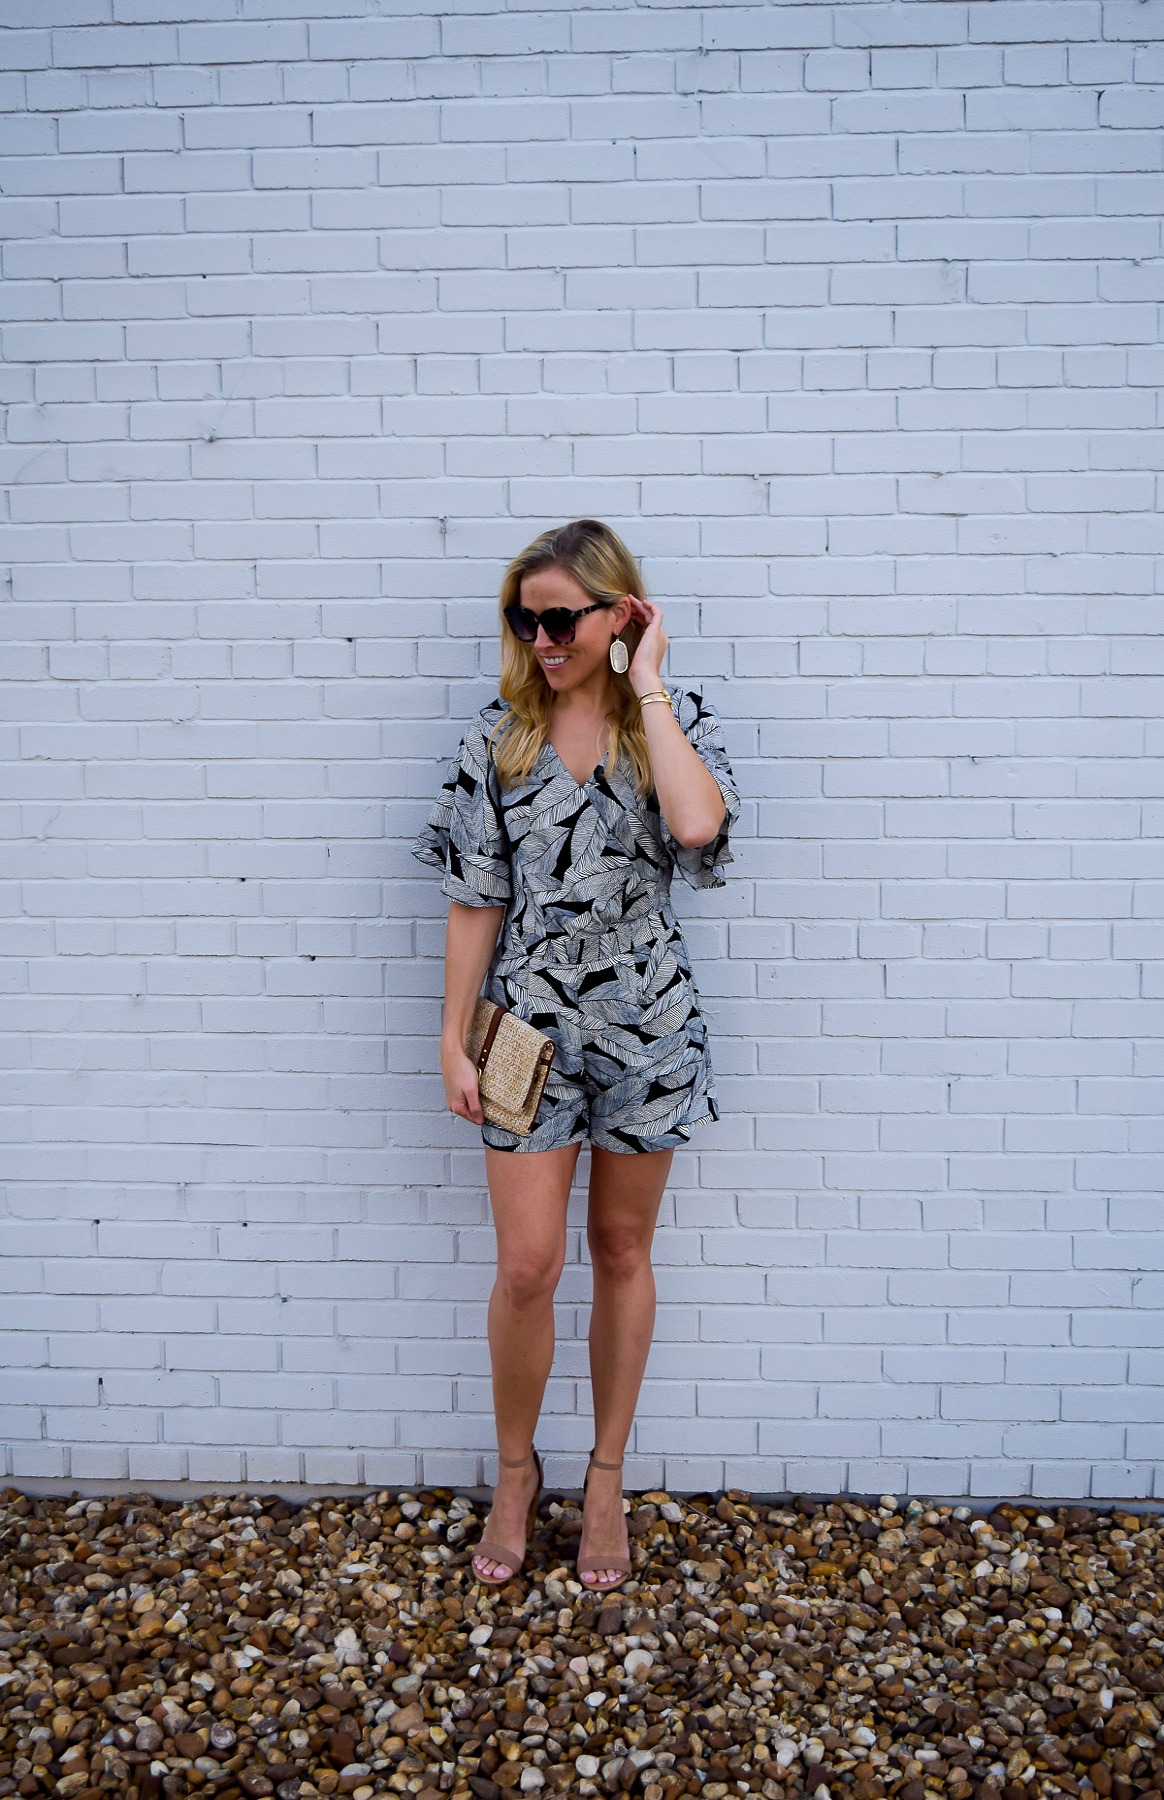 :: Printed Romper + Wish List Wednesday :: - The Sarcastic Blonde